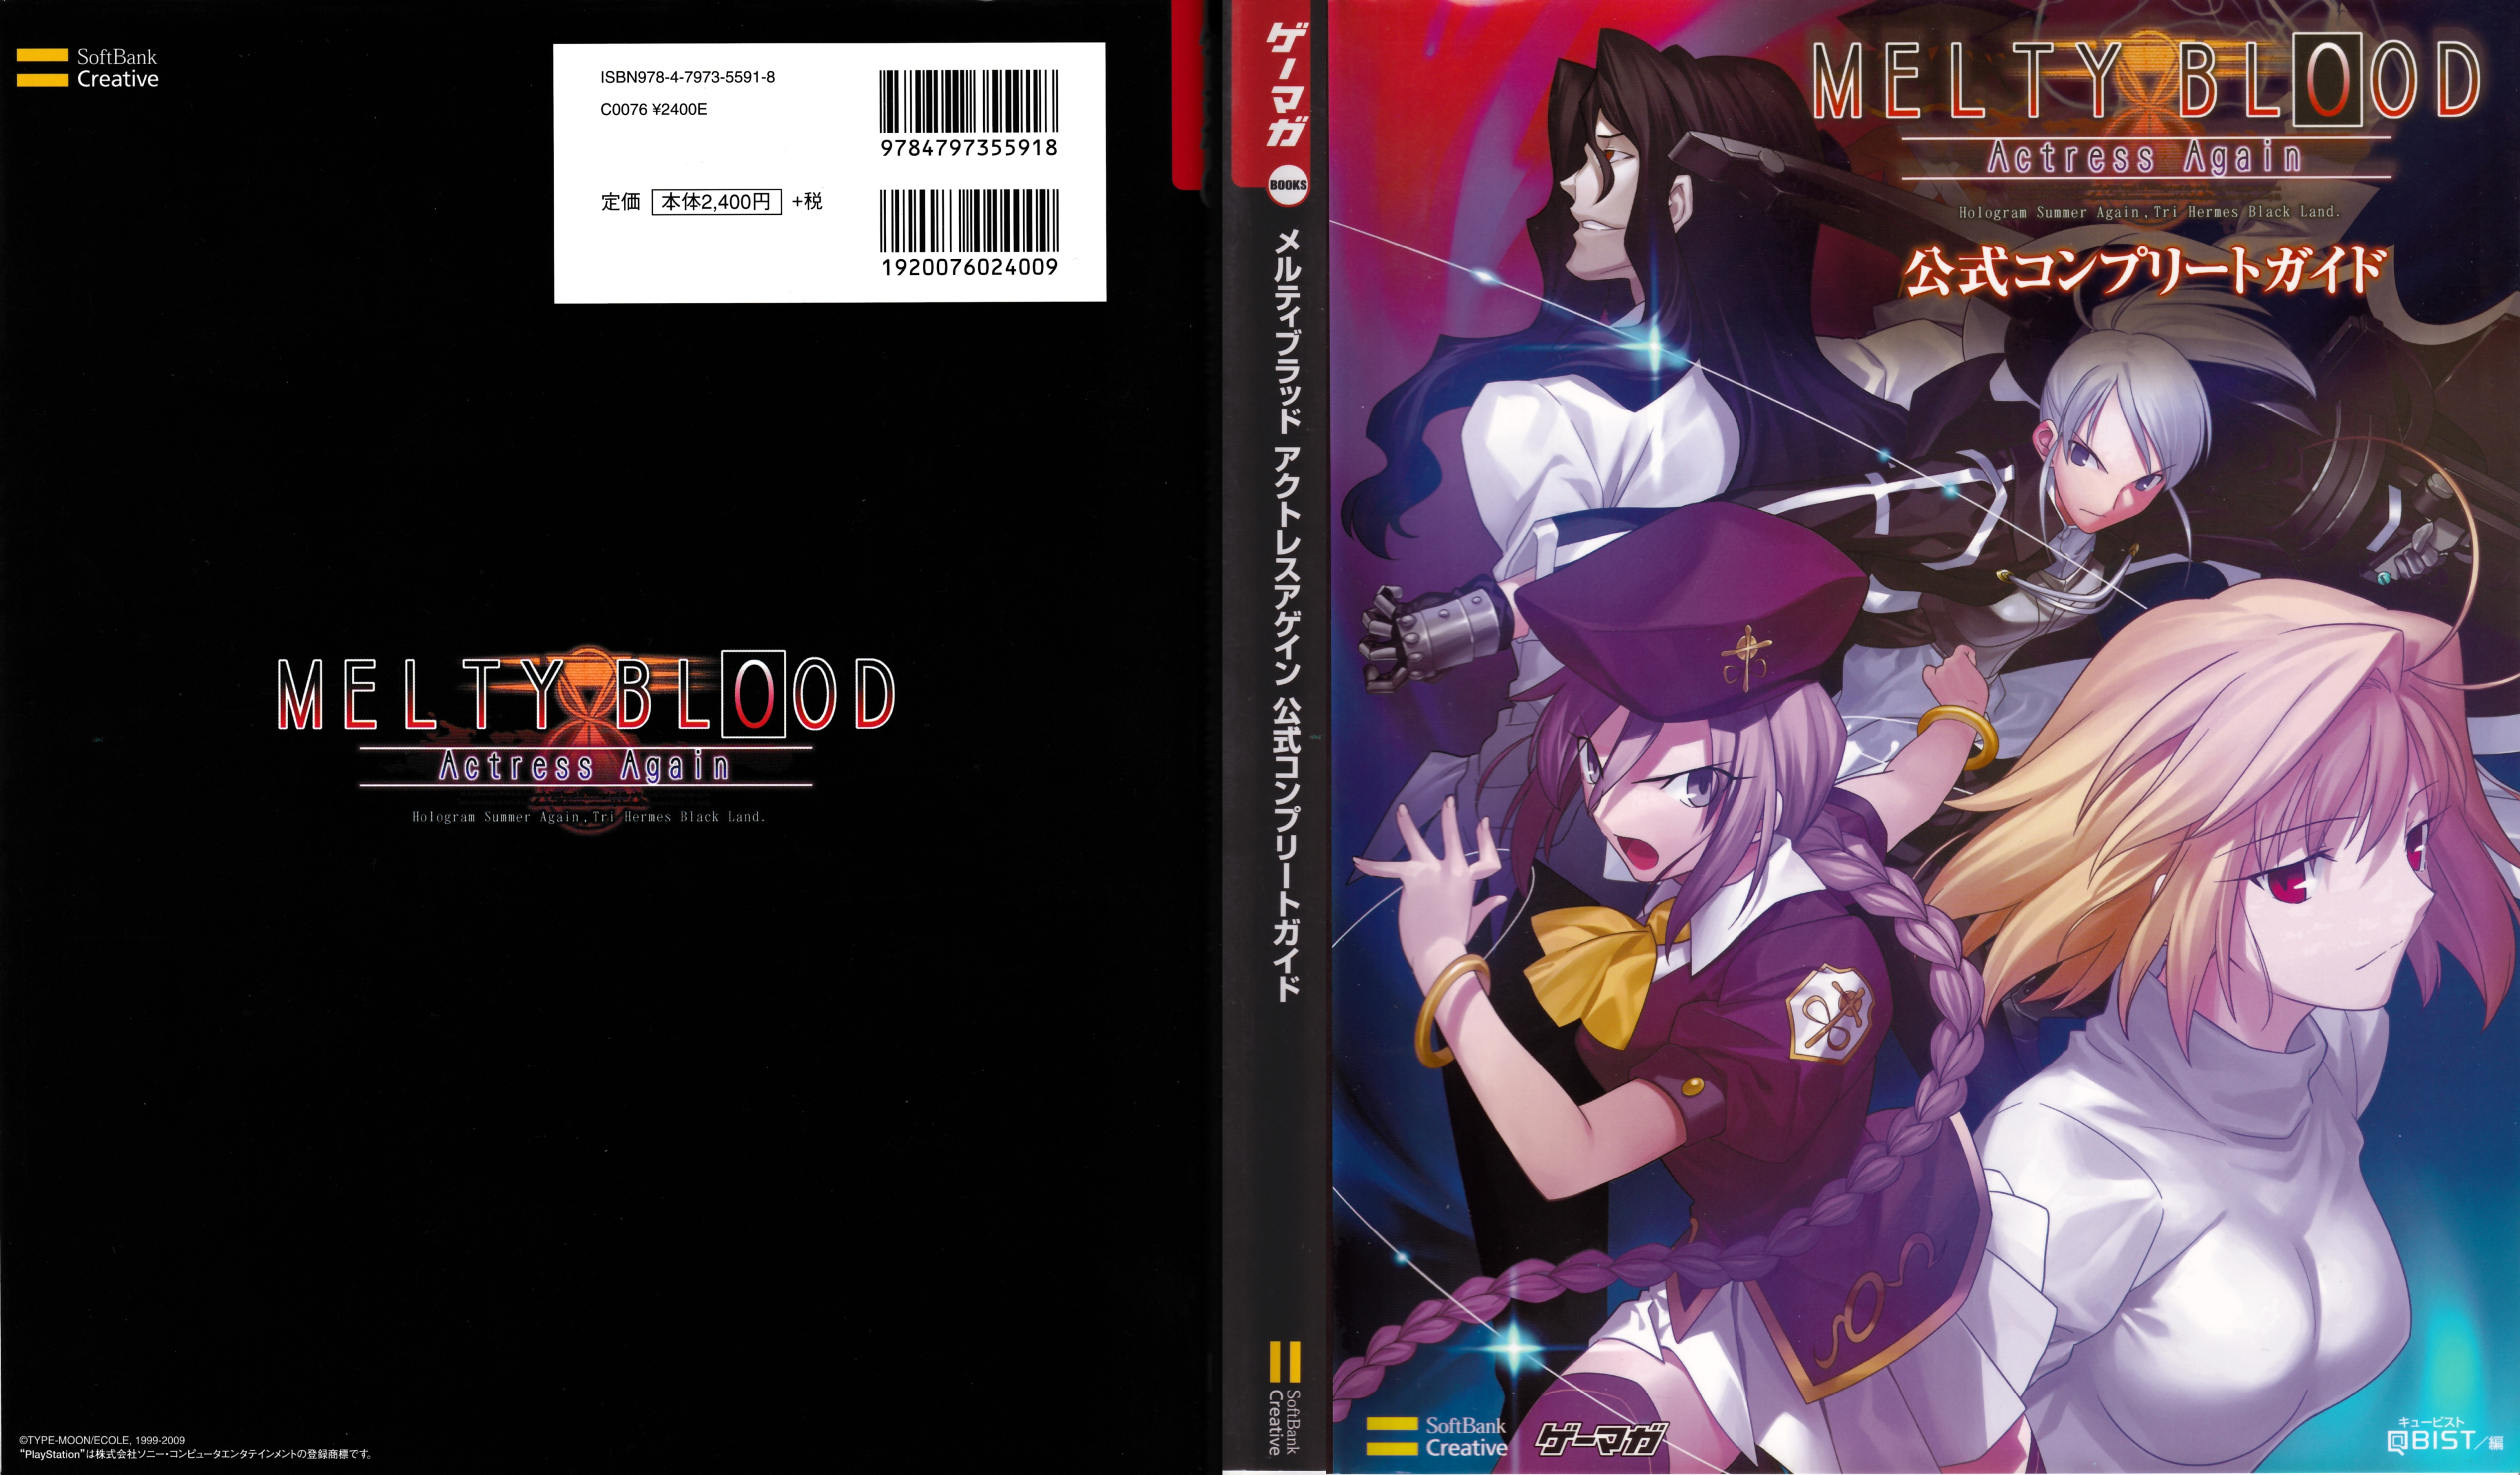 MELTY BLOOD:Actress Again